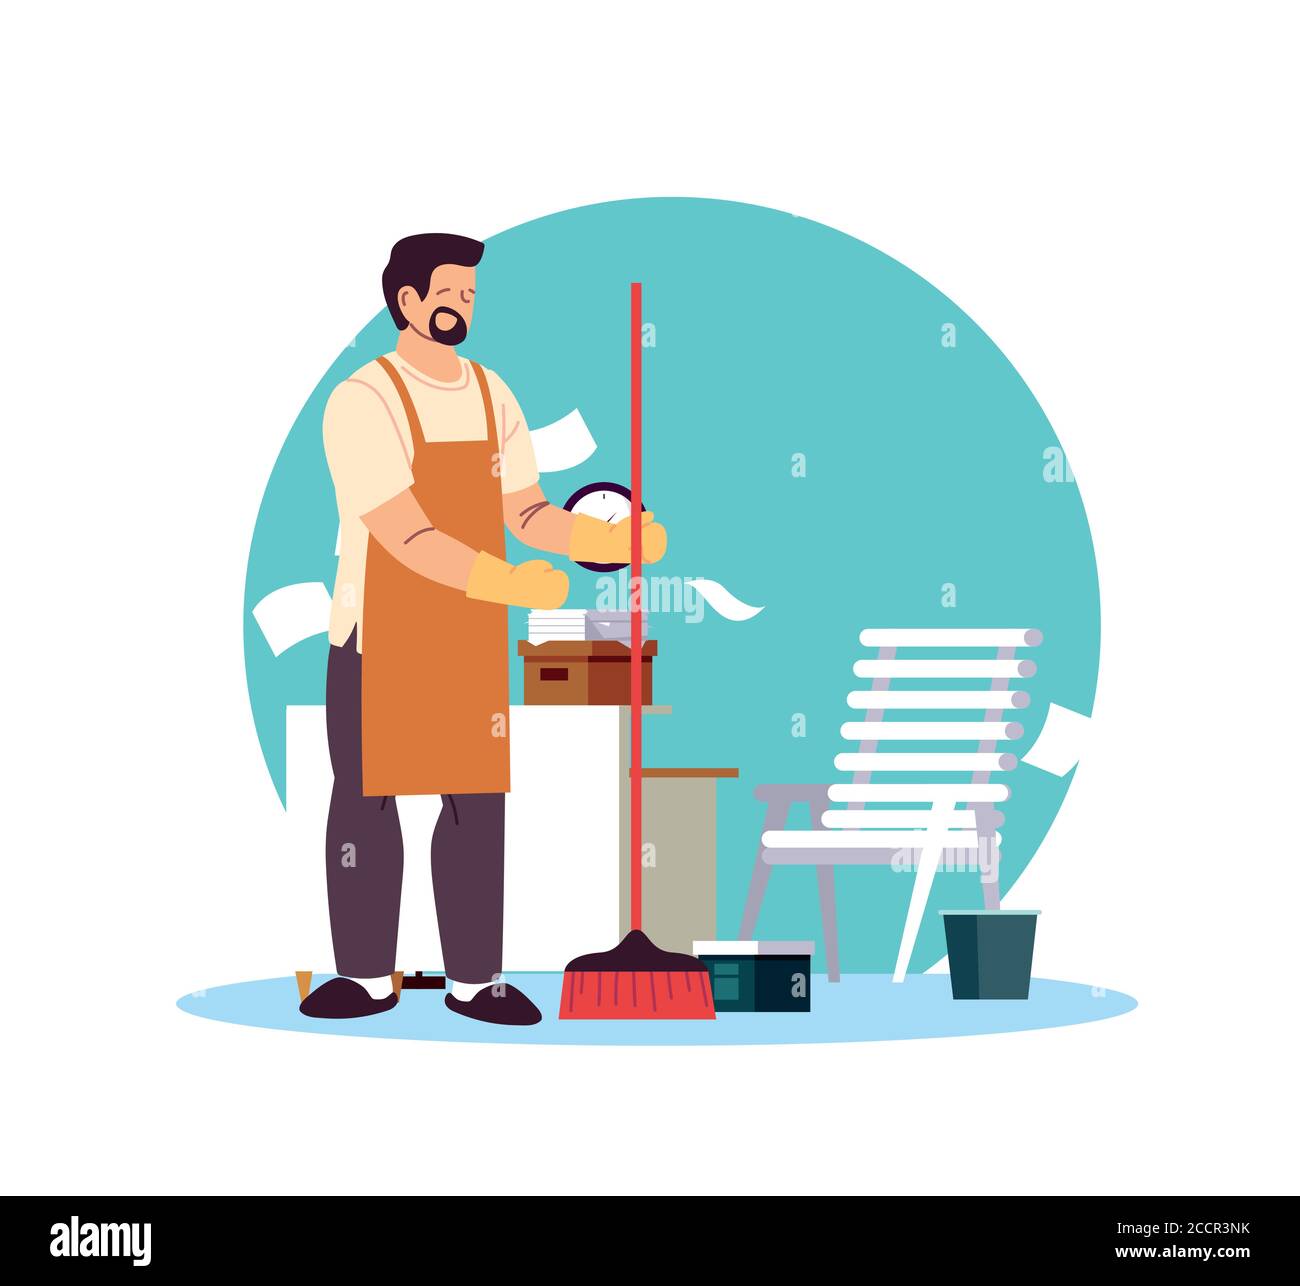 Cleaning man with apron and brooms vector illustration desing Stock Vector